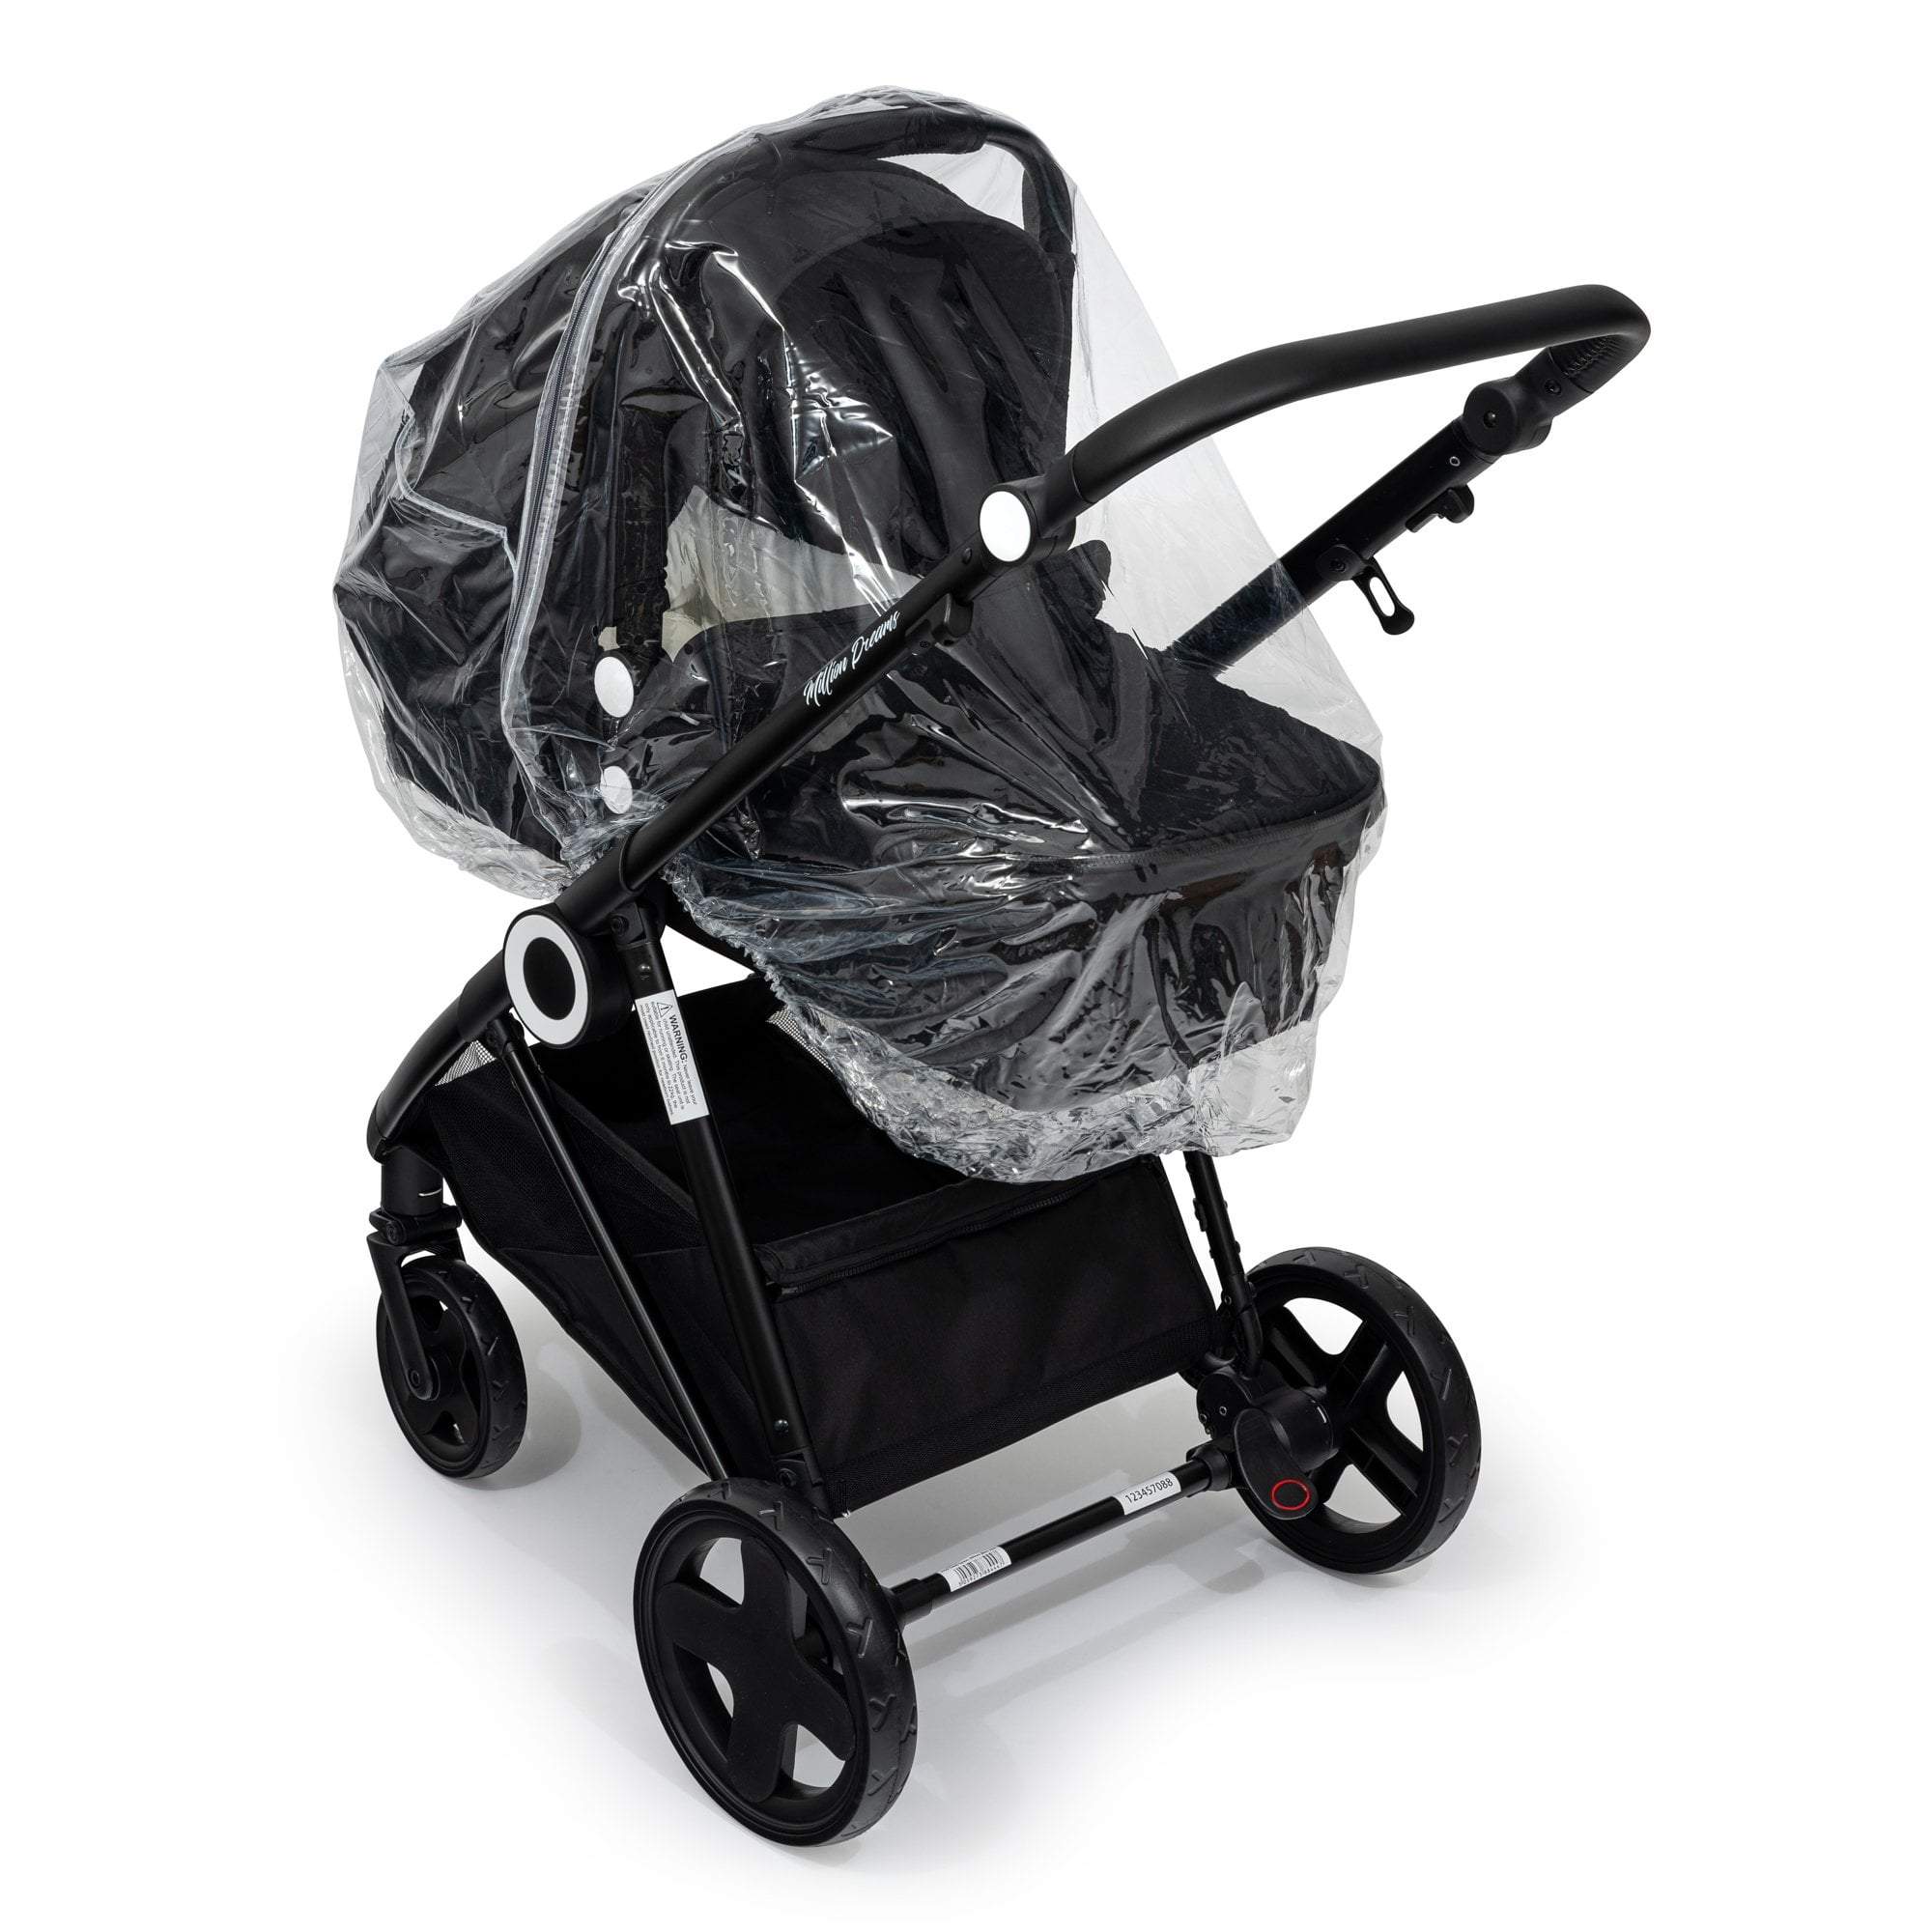 Carrycot Raincover Compatible With Easywalker - Fits All Models - For Your Little One